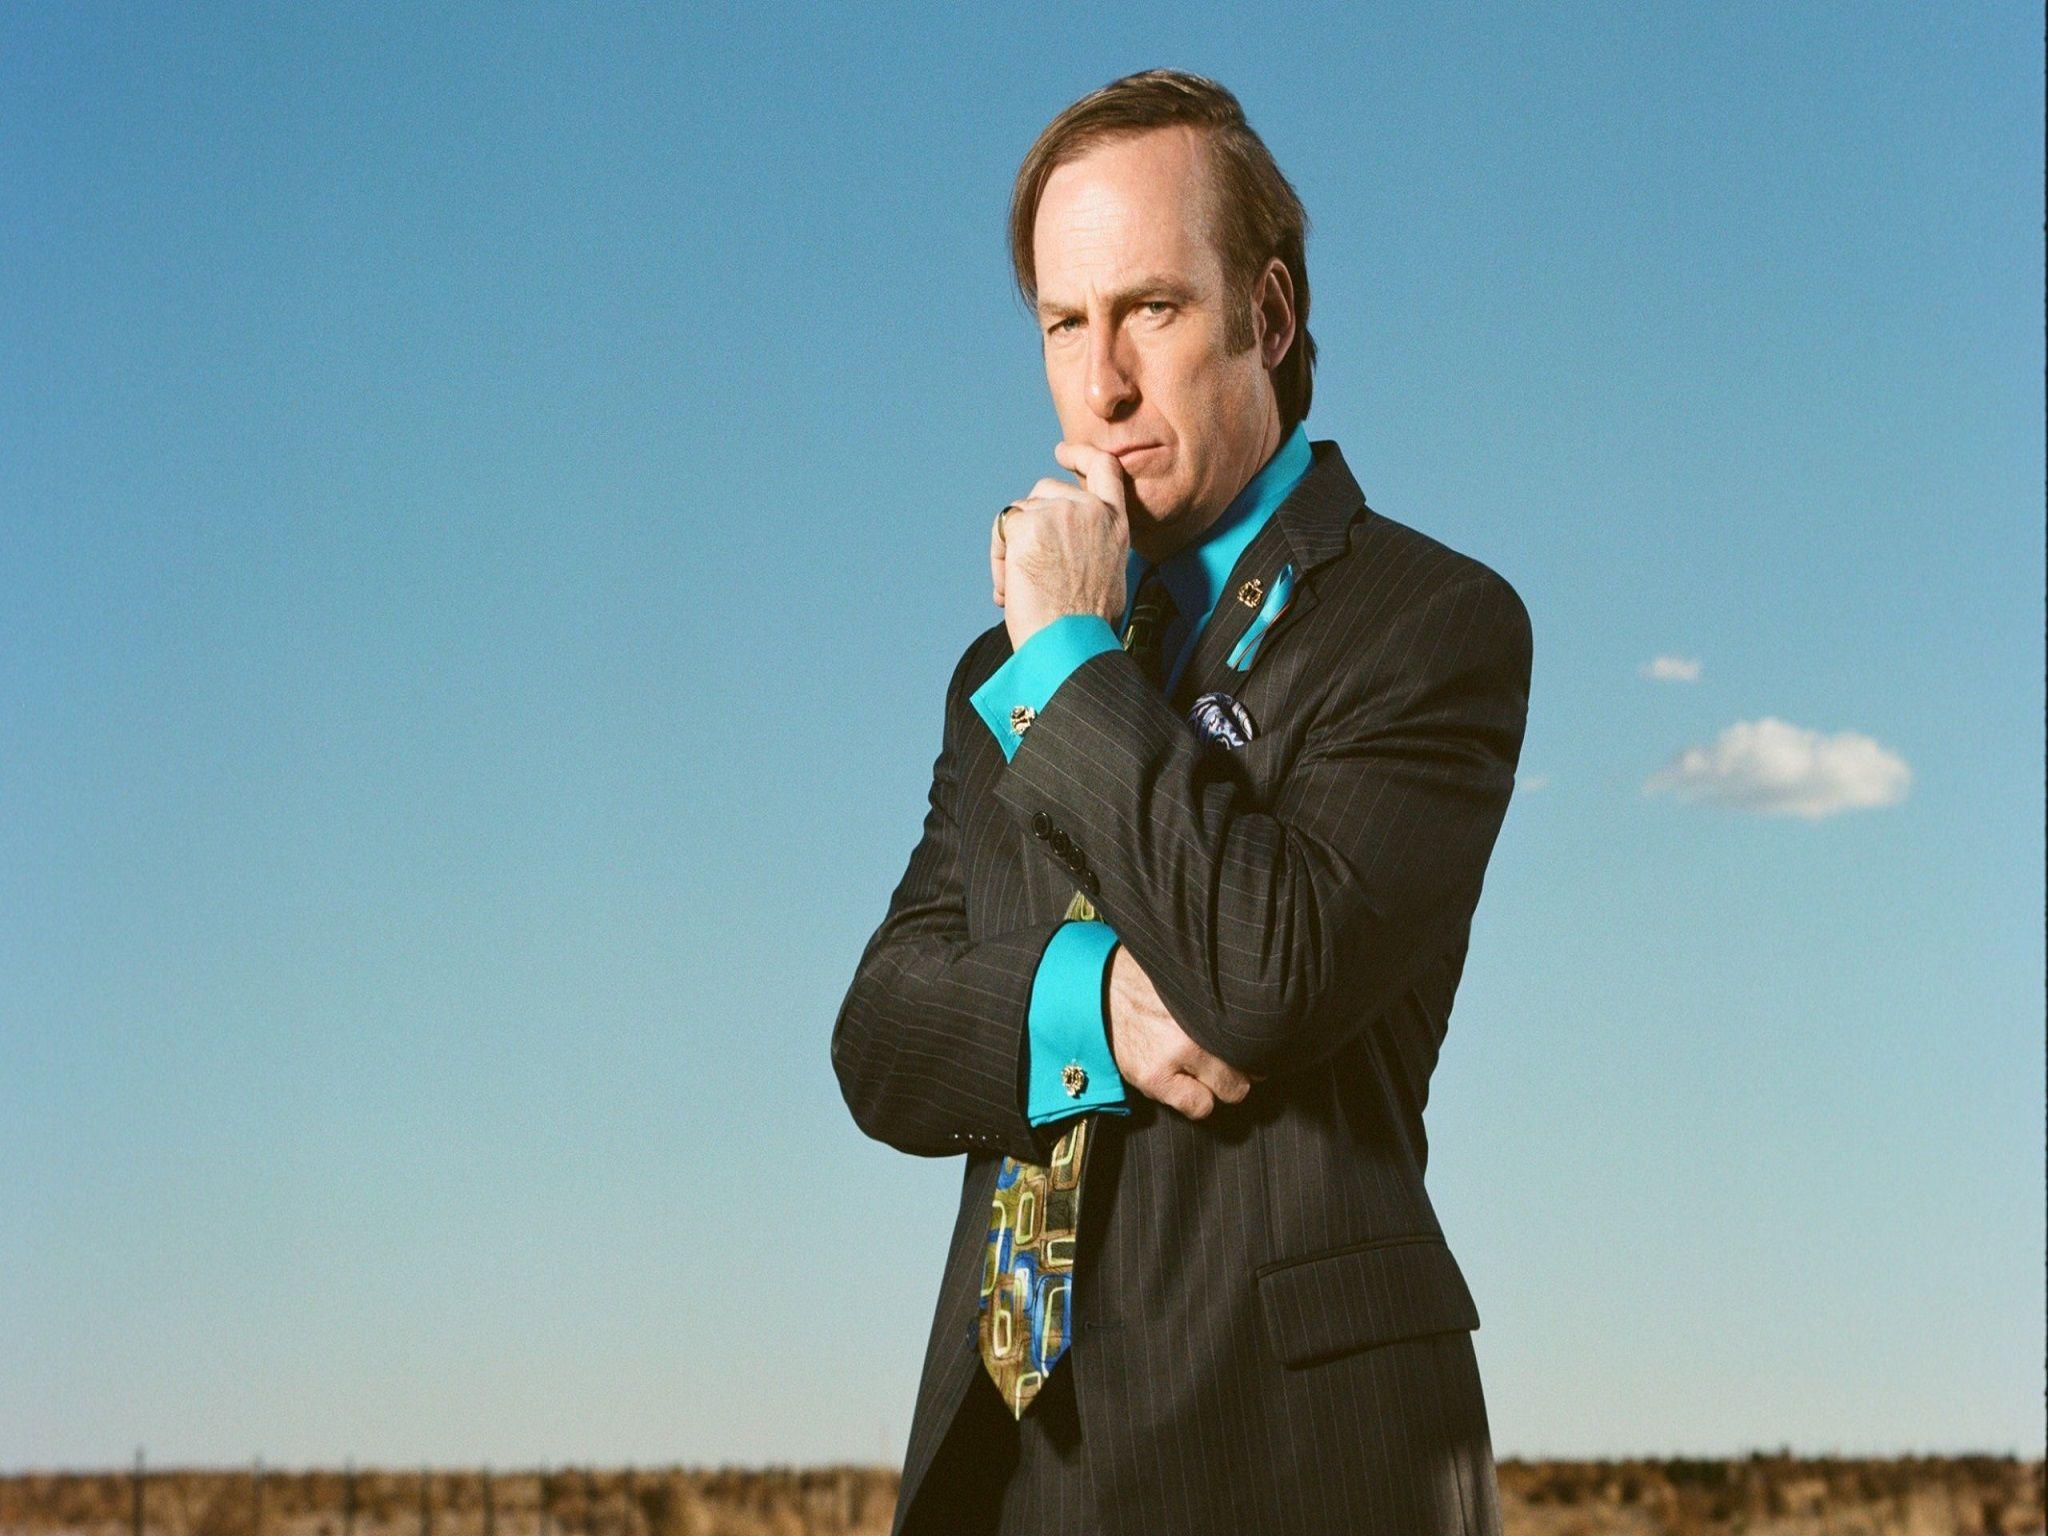 Better Call Saul Wallpaper For iPhone And iPad